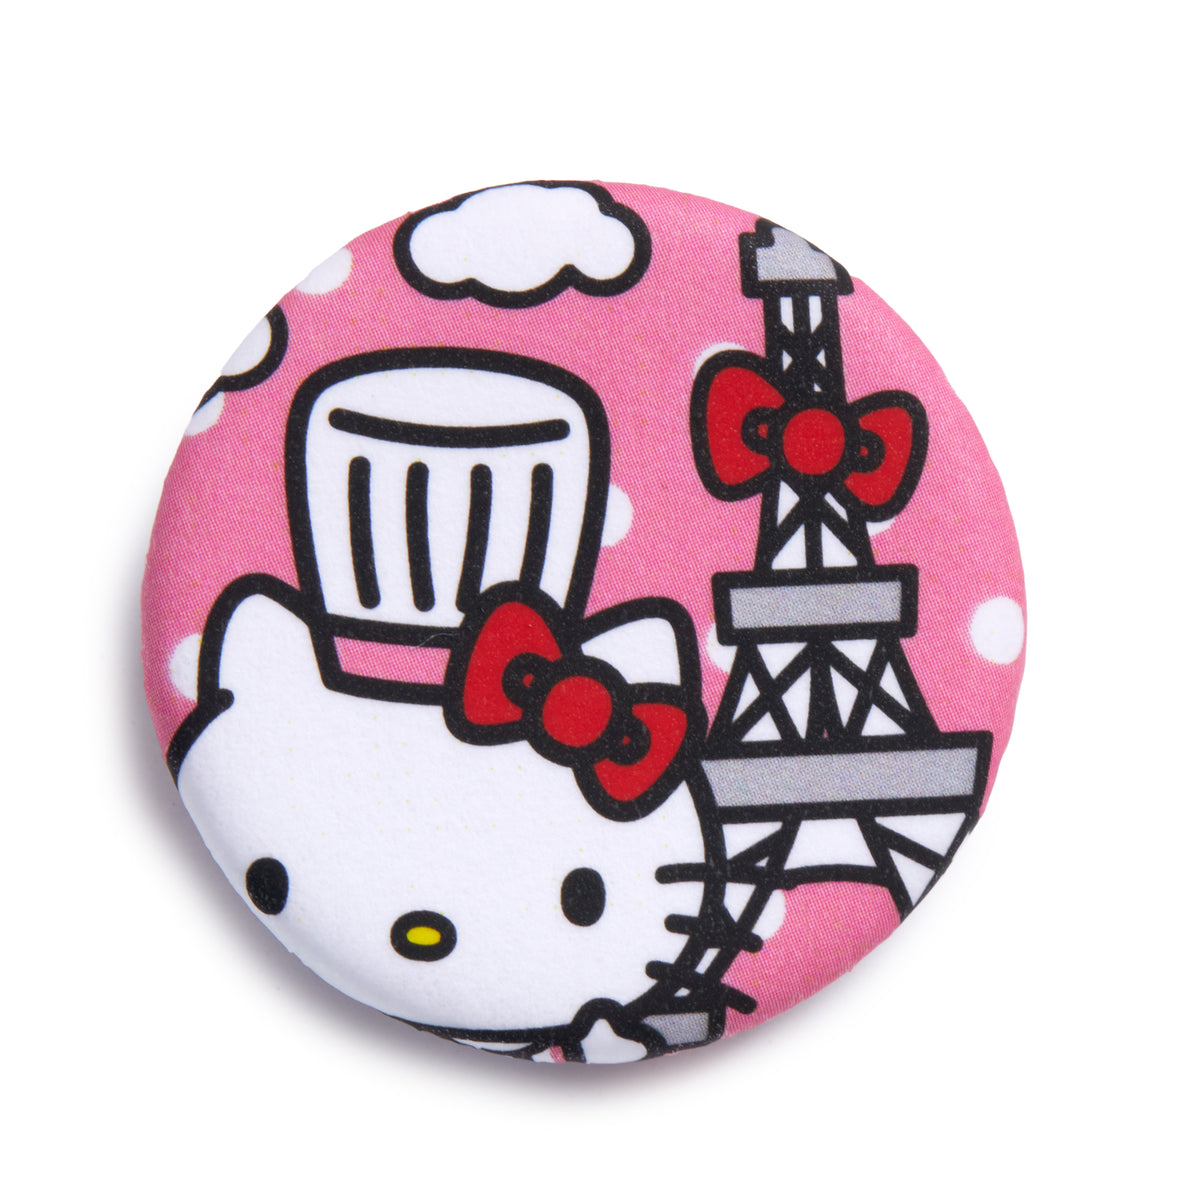 Sanrio Pins and Buttons for Sale